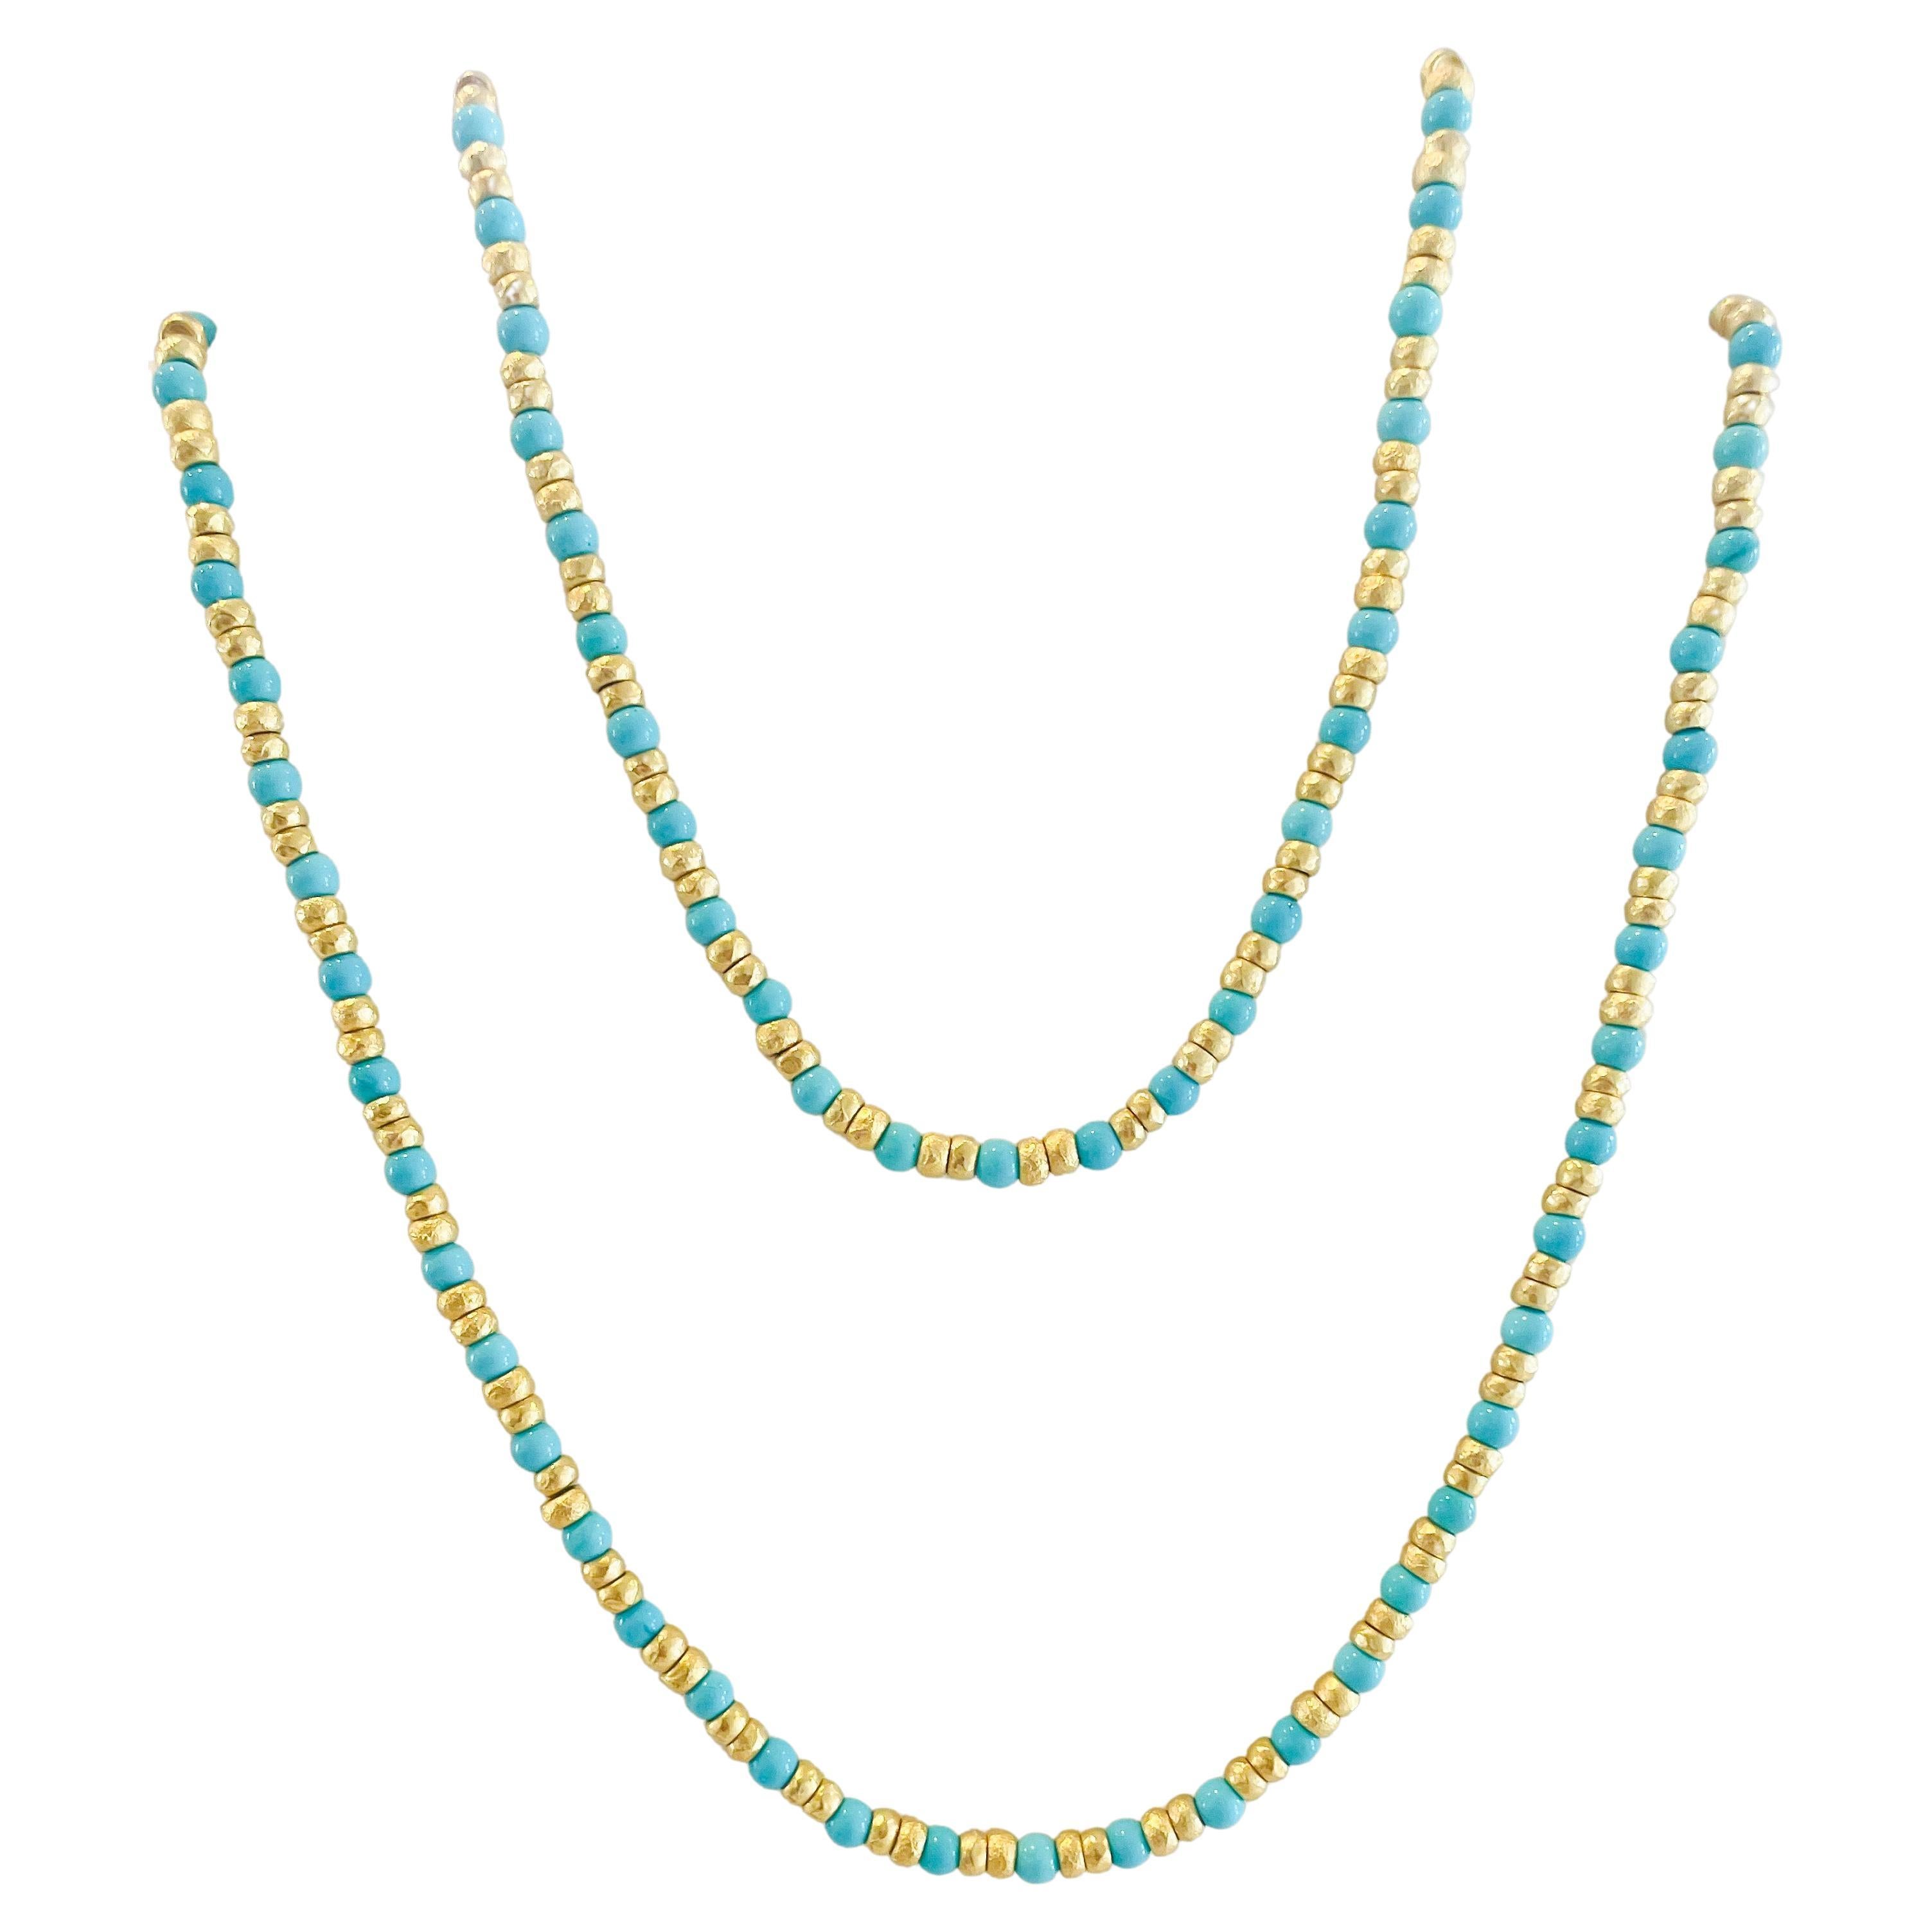 Turquoise & 22k Gold Beaded Necklace by Tagili Designs